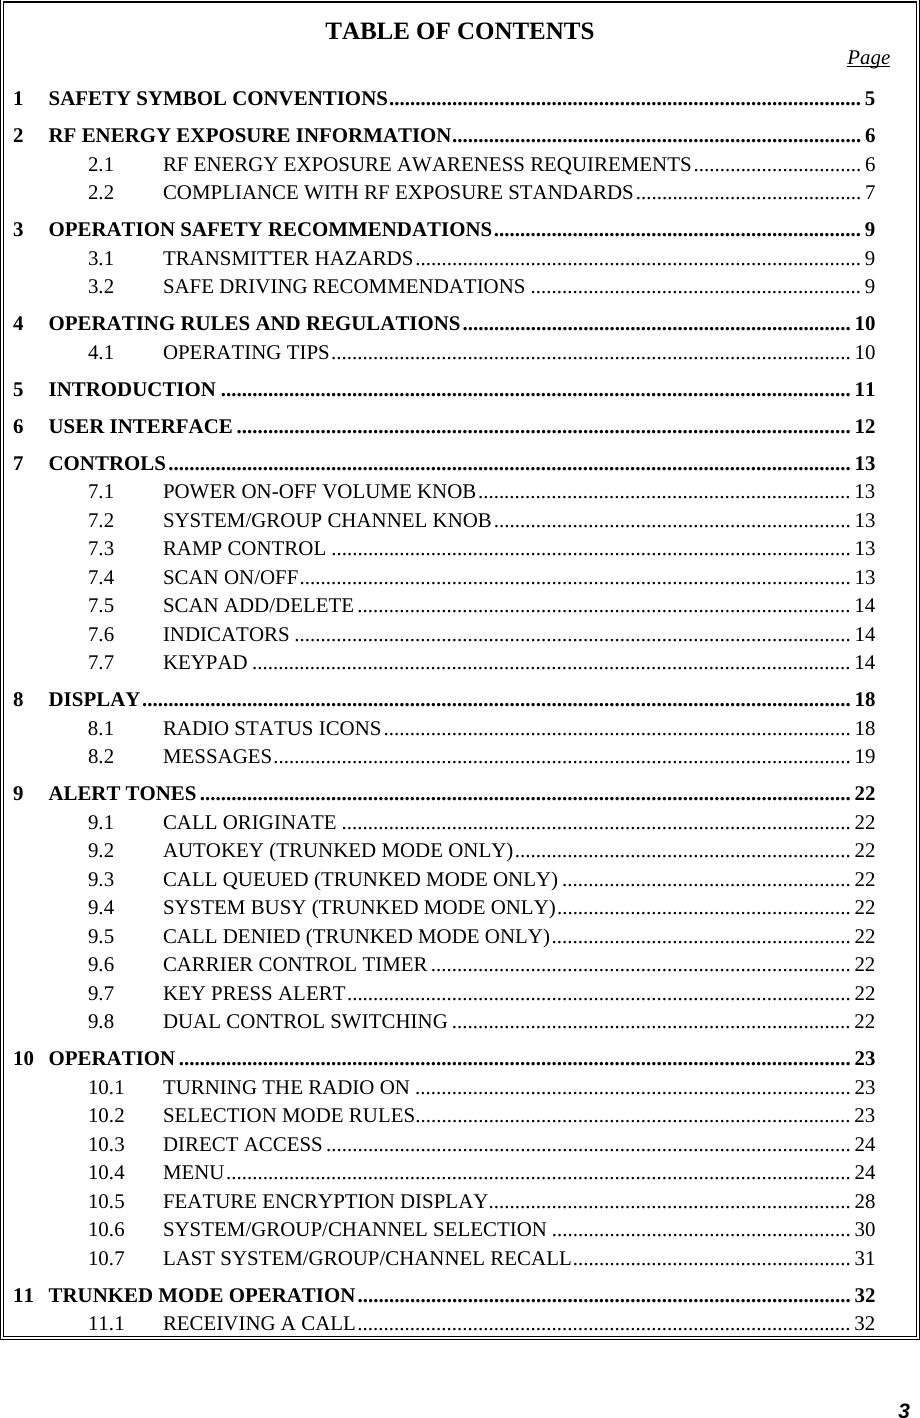 3 TABLE OF CONTENTS  Page 1 SAFETY SYMBOL CONVENTIONS.......................................................................................... 5 2 RF ENERGY EXPOSURE INFORMATION.............................................................................. 6 2.1 RF ENERGY EXPOSURE AWARENESS REQUIREMENTS................................ 6 2.2 COMPLIANCE WITH RF EXPOSURE STANDARDS........................................... 7 3 OPERATION SAFETY RECOMMENDATIONS...................................................................... 9 3.1 TRANSMITTER HAZARDS..................................................................................... 9 3.2 SAFE DRIVING RECOMMENDATIONS ............................................................... 9 4 OPERATING RULES AND REGULATIONS.......................................................................... 10 4.1 OPERATING TIPS................................................................................................... 10 5 INTRODUCTION ........................................................................................................................ 11 6 USER INTERFACE ..................................................................................................................... 12 7 CONTROLS.................................................................................................................................. 13 7.1 POWER ON-OFF VOLUME KNOB....................................................................... 13 7.2 SYSTEM/GROUP CHANNEL KNOB.................................................................... 13 7.3 RAMP CONTROL ................................................................................................... 13 7.4 SCAN ON/OFF......................................................................................................... 13 7.5 SCAN ADD/DELETE .............................................................................................. 14 7.6 INDICATORS .......................................................................................................... 14 7.7 KEYPAD .................................................................................................................. 14 8 DISPLAY.......................................................................................................................................18 8.1 RADIO STATUS ICONS......................................................................................... 18 8.2 MESSAGES.............................................................................................................. 19 9 ALERT TONES............................................................................................................................ 22 9.1 CALL ORIGINATE ................................................................................................. 22 9.2 AUTOKEY (TRUNKED MODE ONLY)................................................................ 22 9.3 CALL QUEUED (TRUNKED MODE ONLY) ....................................................... 22 9.4 SYSTEM BUSY (TRUNKED MODE ONLY)........................................................ 22 9.5 CALL DENIED (TRUNKED MODE ONLY)......................................................... 22 9.6 CARRIER CONTROL TIMER ................................................................................ 22 9.7 KEY PRESS ALERT................................................................................................ 22 9.8 DUAL CONTROL SWITCHING ............................................................................ 22 10 OPERATION ................................................................................................................................ 23 10.1 TURNING THE RADIO ON ................................................................................... 23 10.2 SELECTION MODE RULES................................................................................... 23 10.3 DIRECT ACCESS .................................................................................................... 24 10.4 MENU....................................................................................................................... 24 10.5 FEATURE ENCRYPTION DISPLAY..................................................................... 28 10.6 SYSTEM/GROUP/CHANNEL SELECTION ......................................................... 30 10.7 LAST SYSTEM/GROUP/CHANNEL RECALL..................................................... 31 11 TRUNKED MODE OPERATION.............................................................................................. 32 11.1 RECEIVING A CALL.............................................................................................. 32 